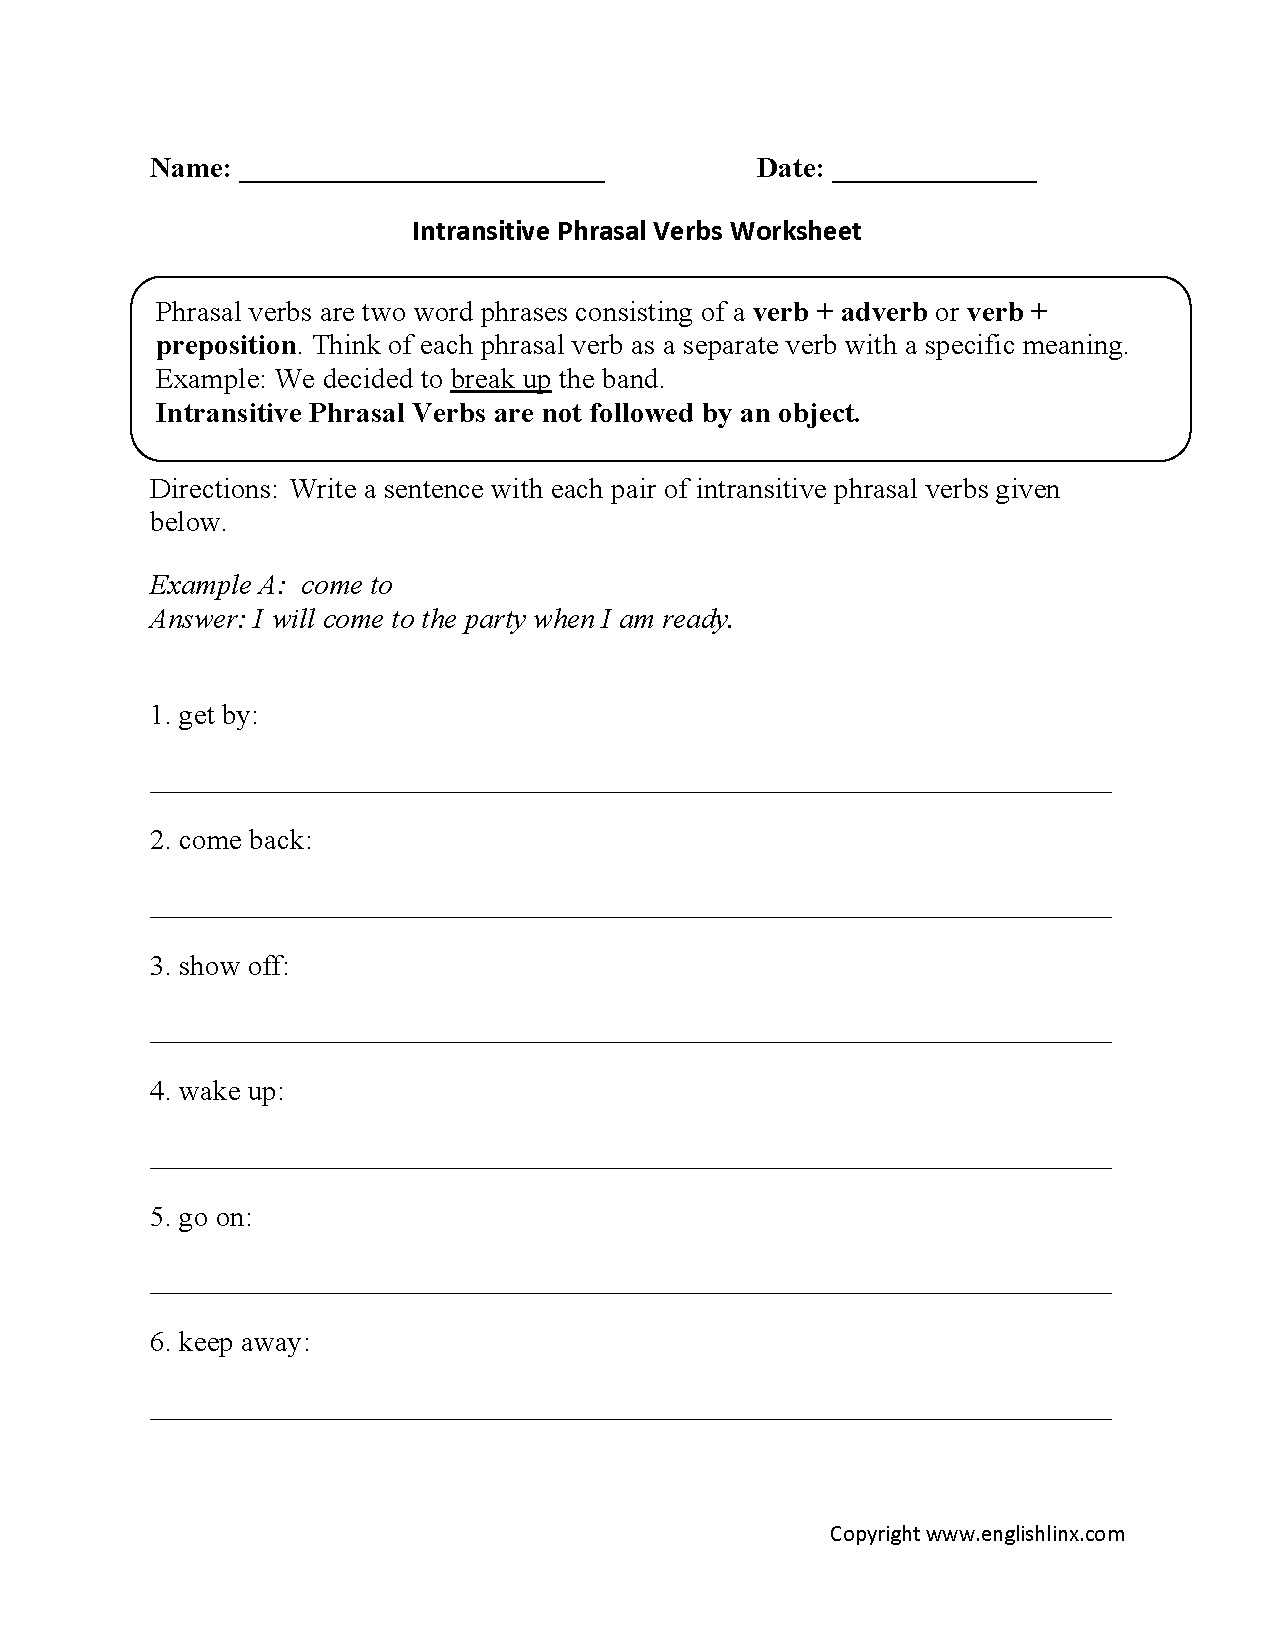 Critical Thinking Worksheets Also Worksheet Writing Dates New Intransitive Phrasal Verbs Worksheet